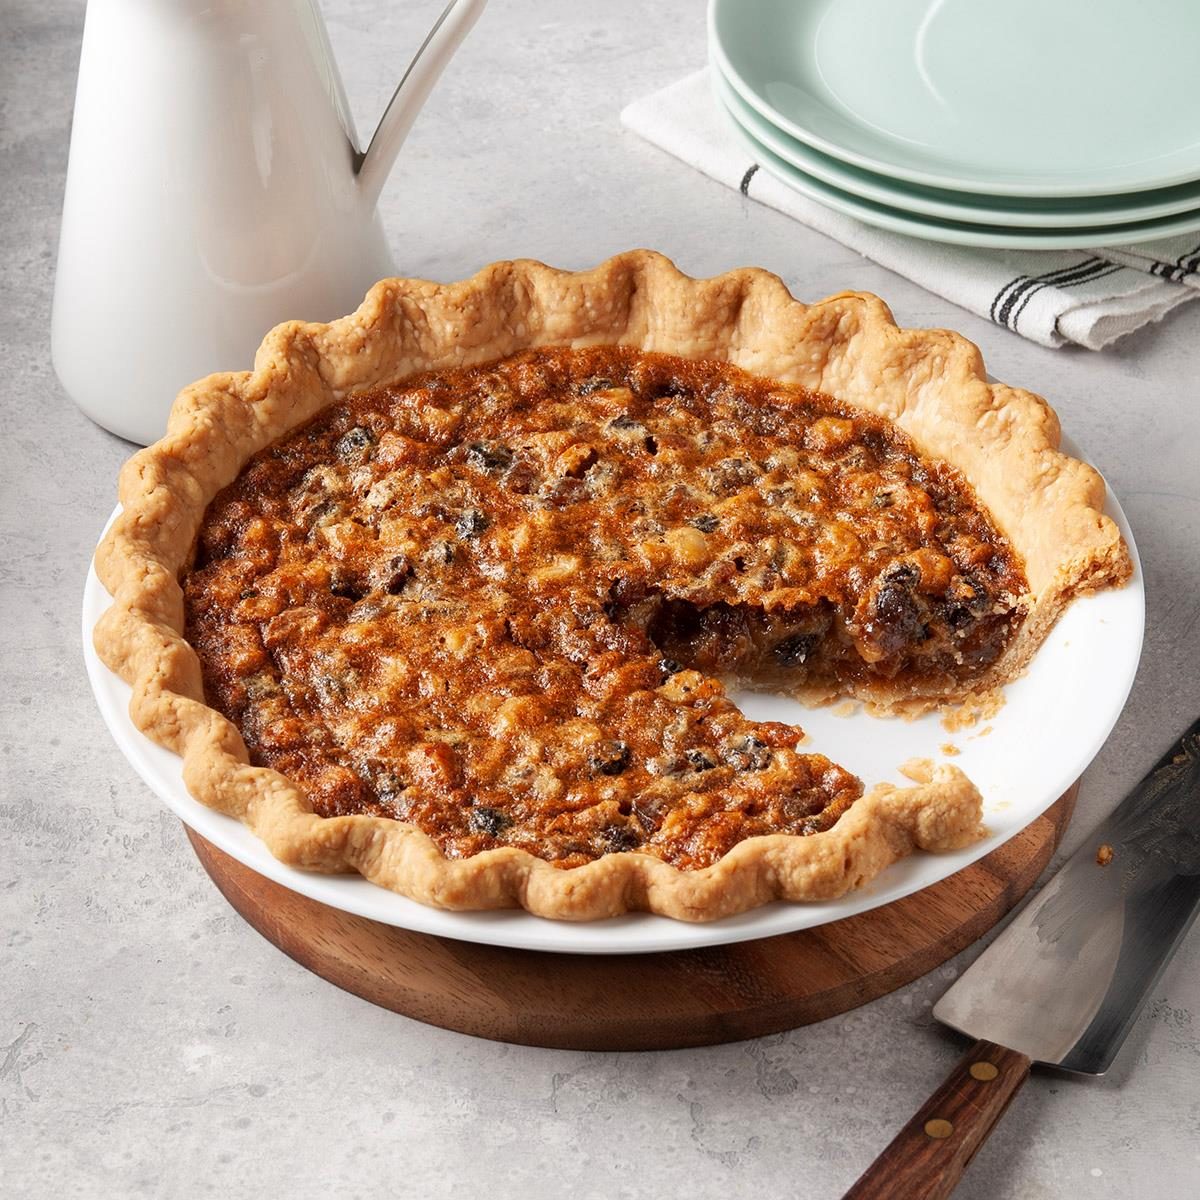 Mincemeat Pie Recipe, Whats Cooking America